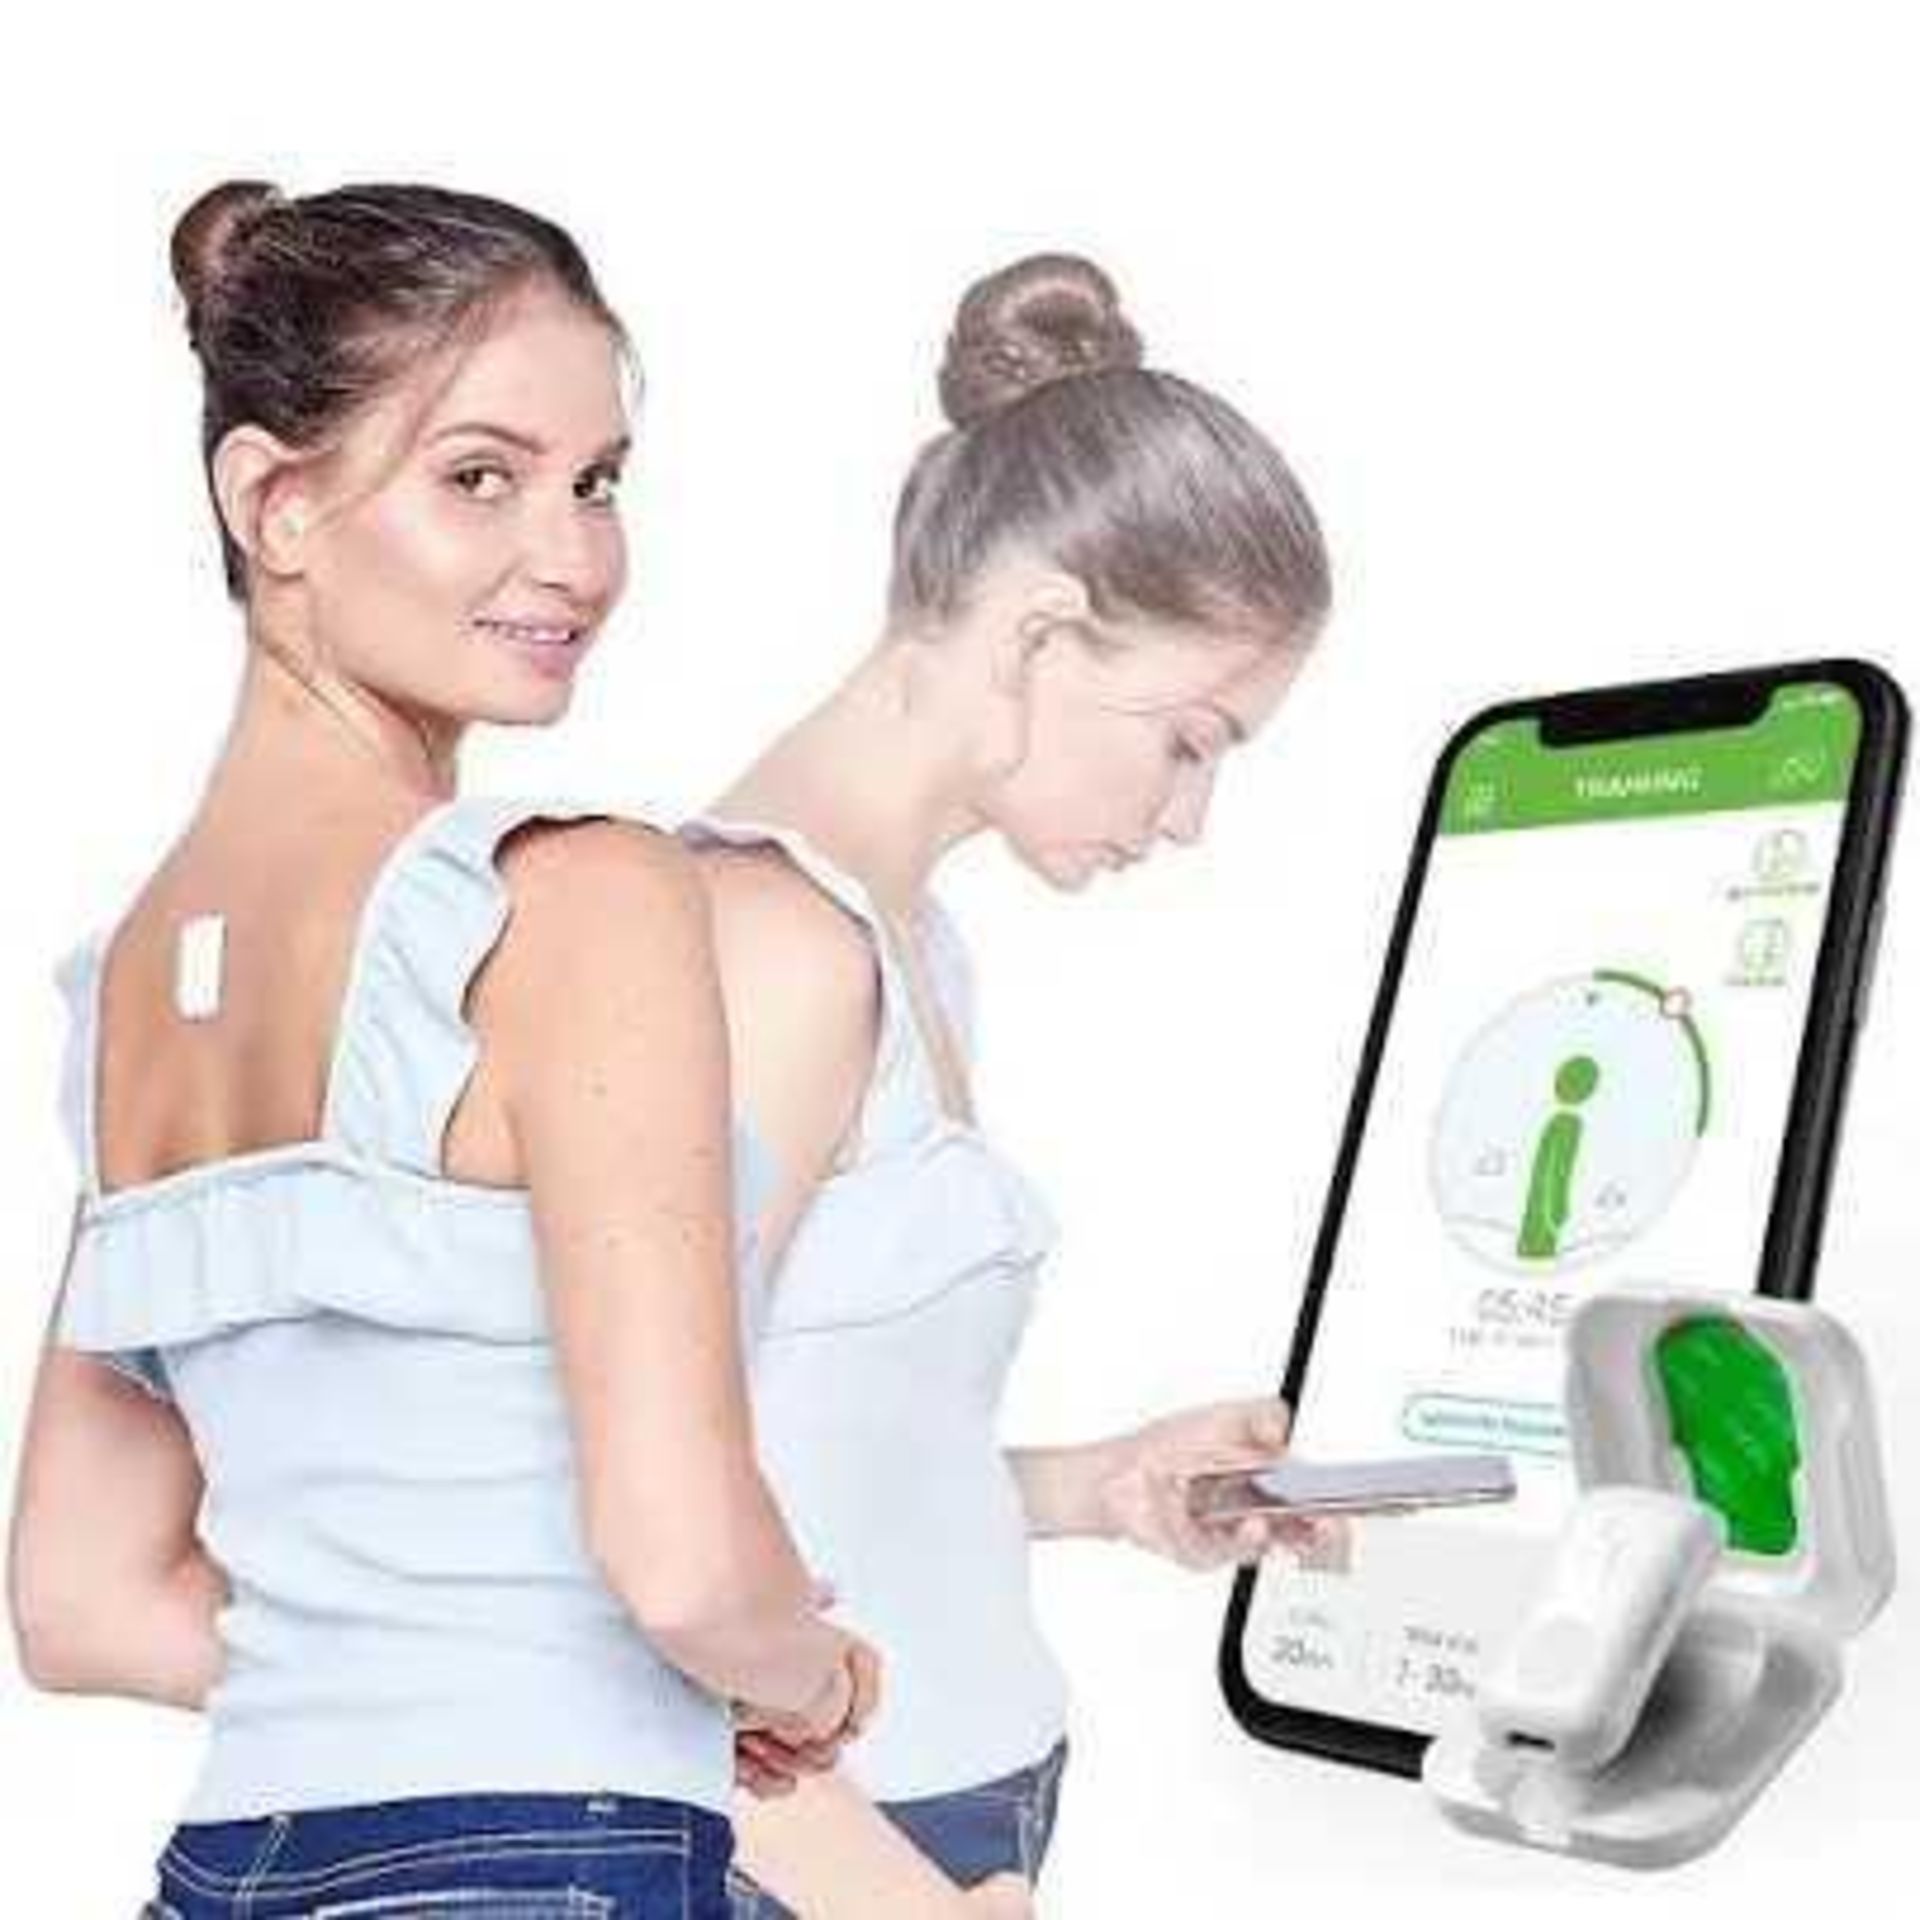 RRP £200 Lot To Contain 2 Boxed Upright Go2 Your Personal Posture Trainers